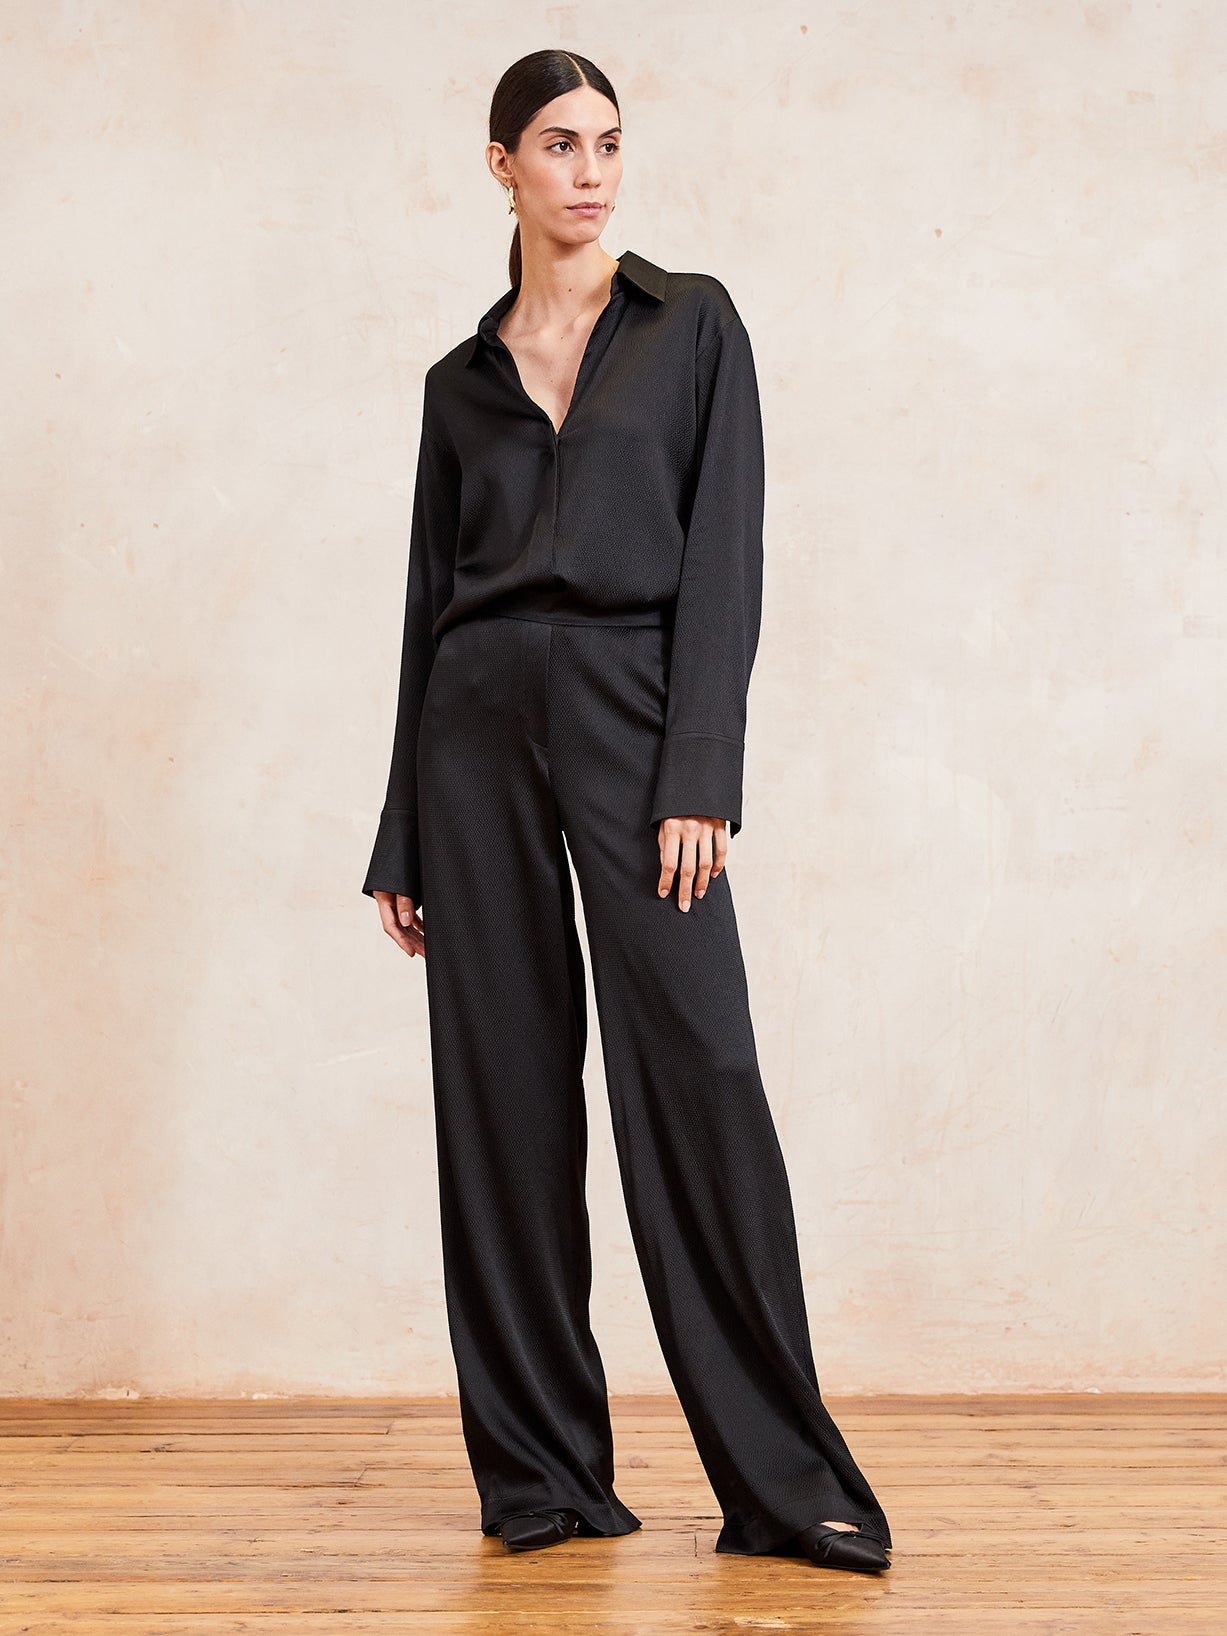 BECCA - Black Hammered Silk Trousers – The Summer Edit